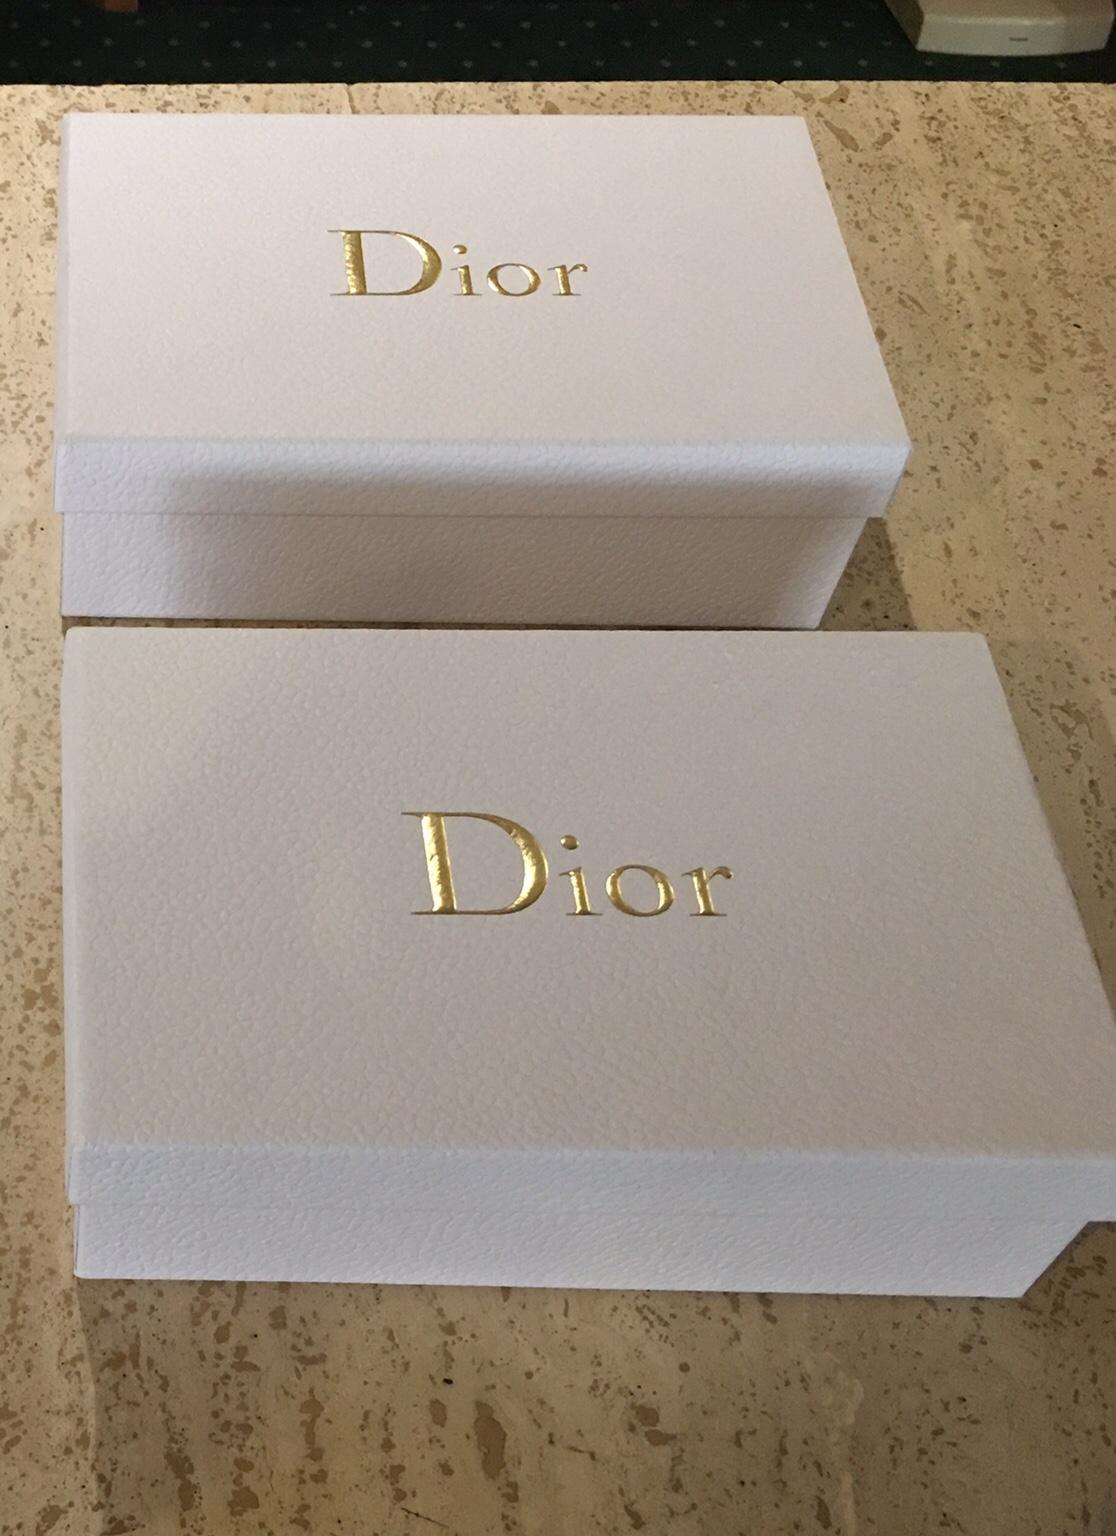 Dior TWO small boxes/ paper bag /Tissue in SW7 London for